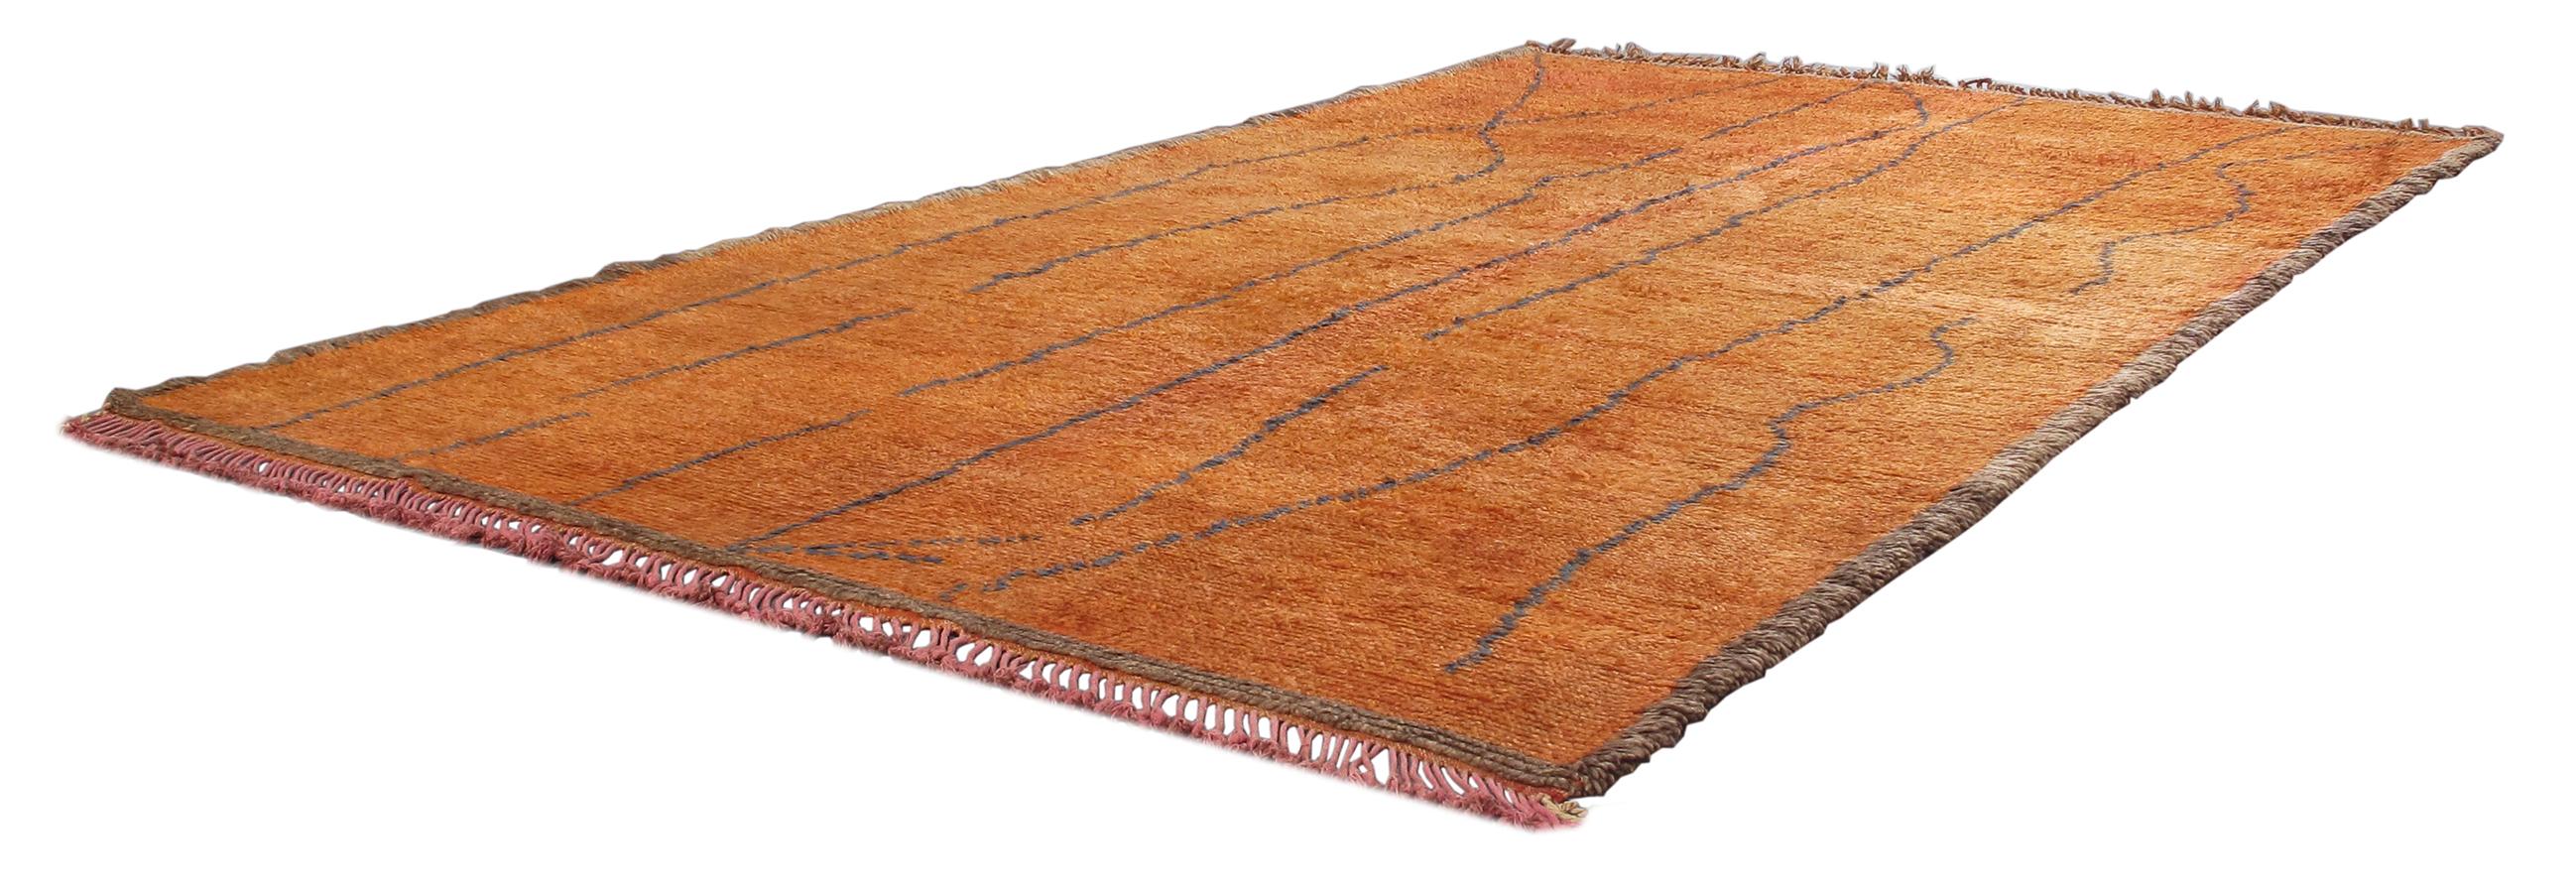 Vintage Moroccan Beni Ourain Berber Tribal Rug In Excellent Condition For Sale In New York, NY